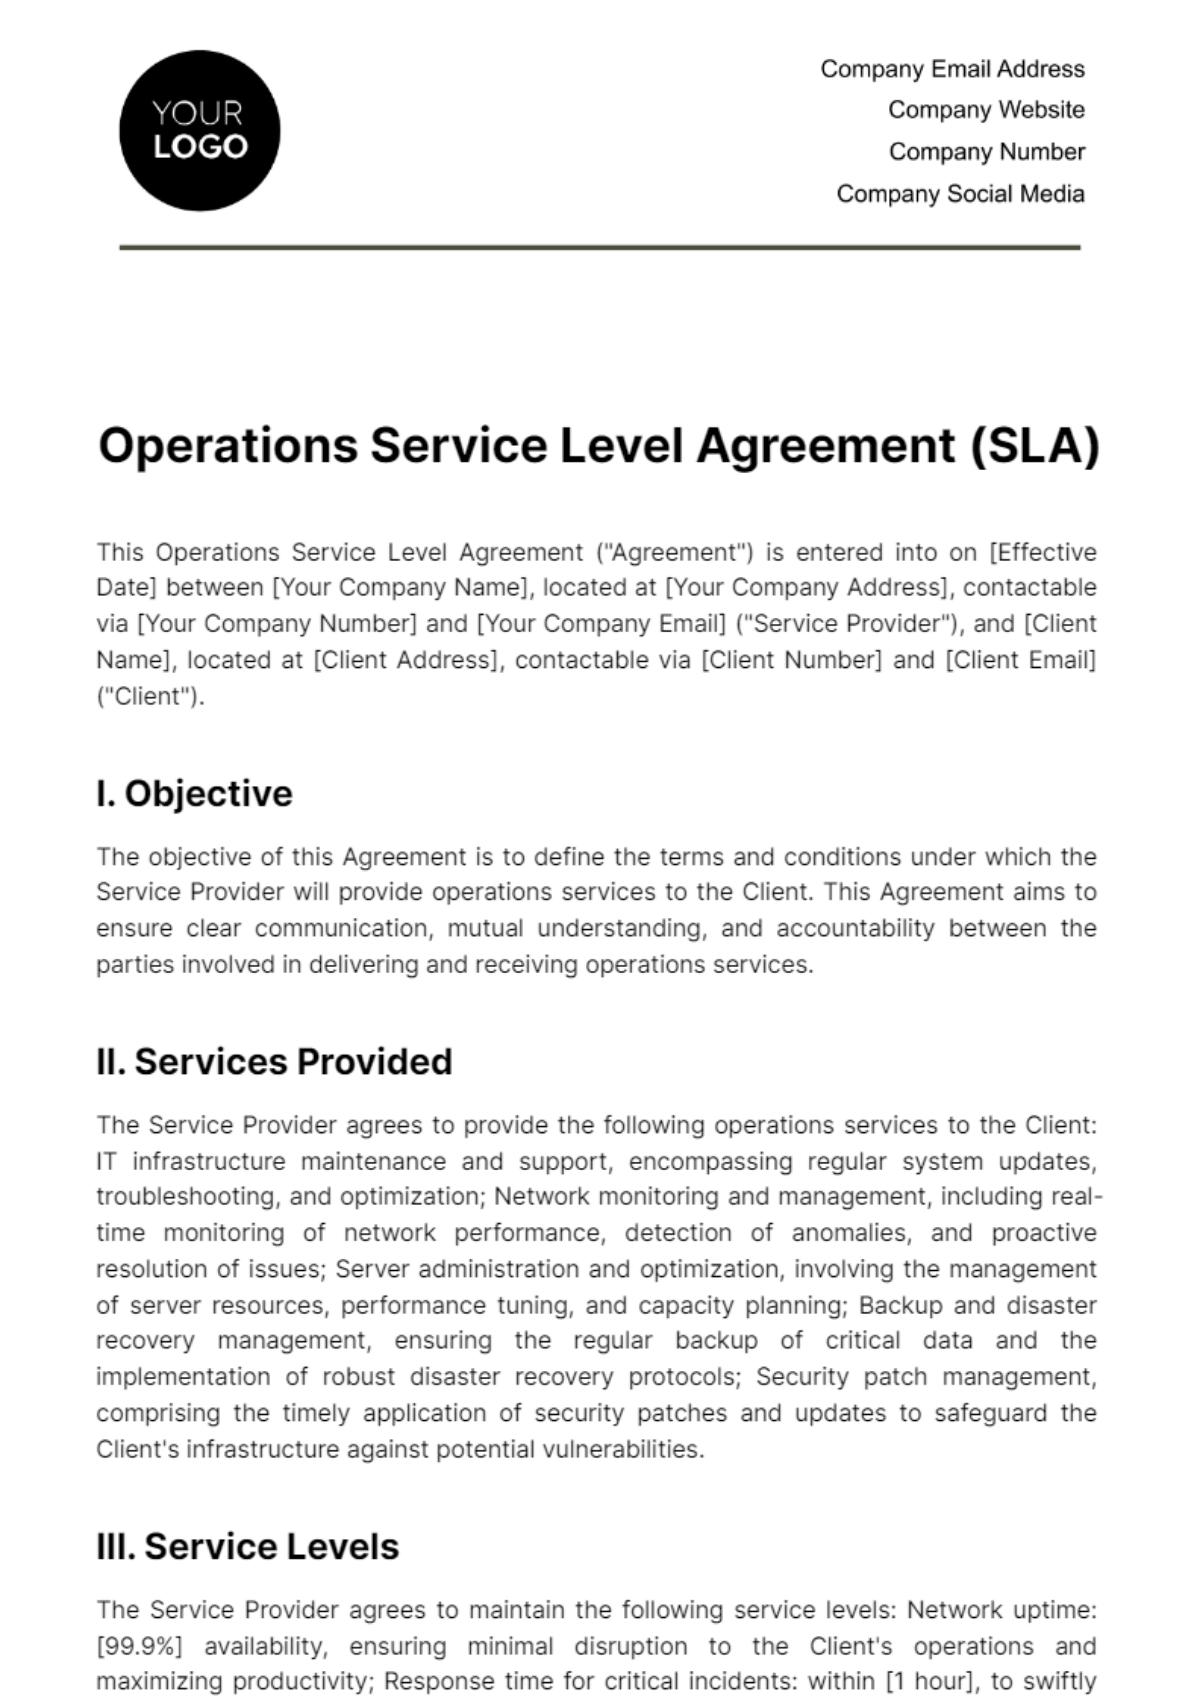 Free Operations Service Level Agreement (SLA) Template